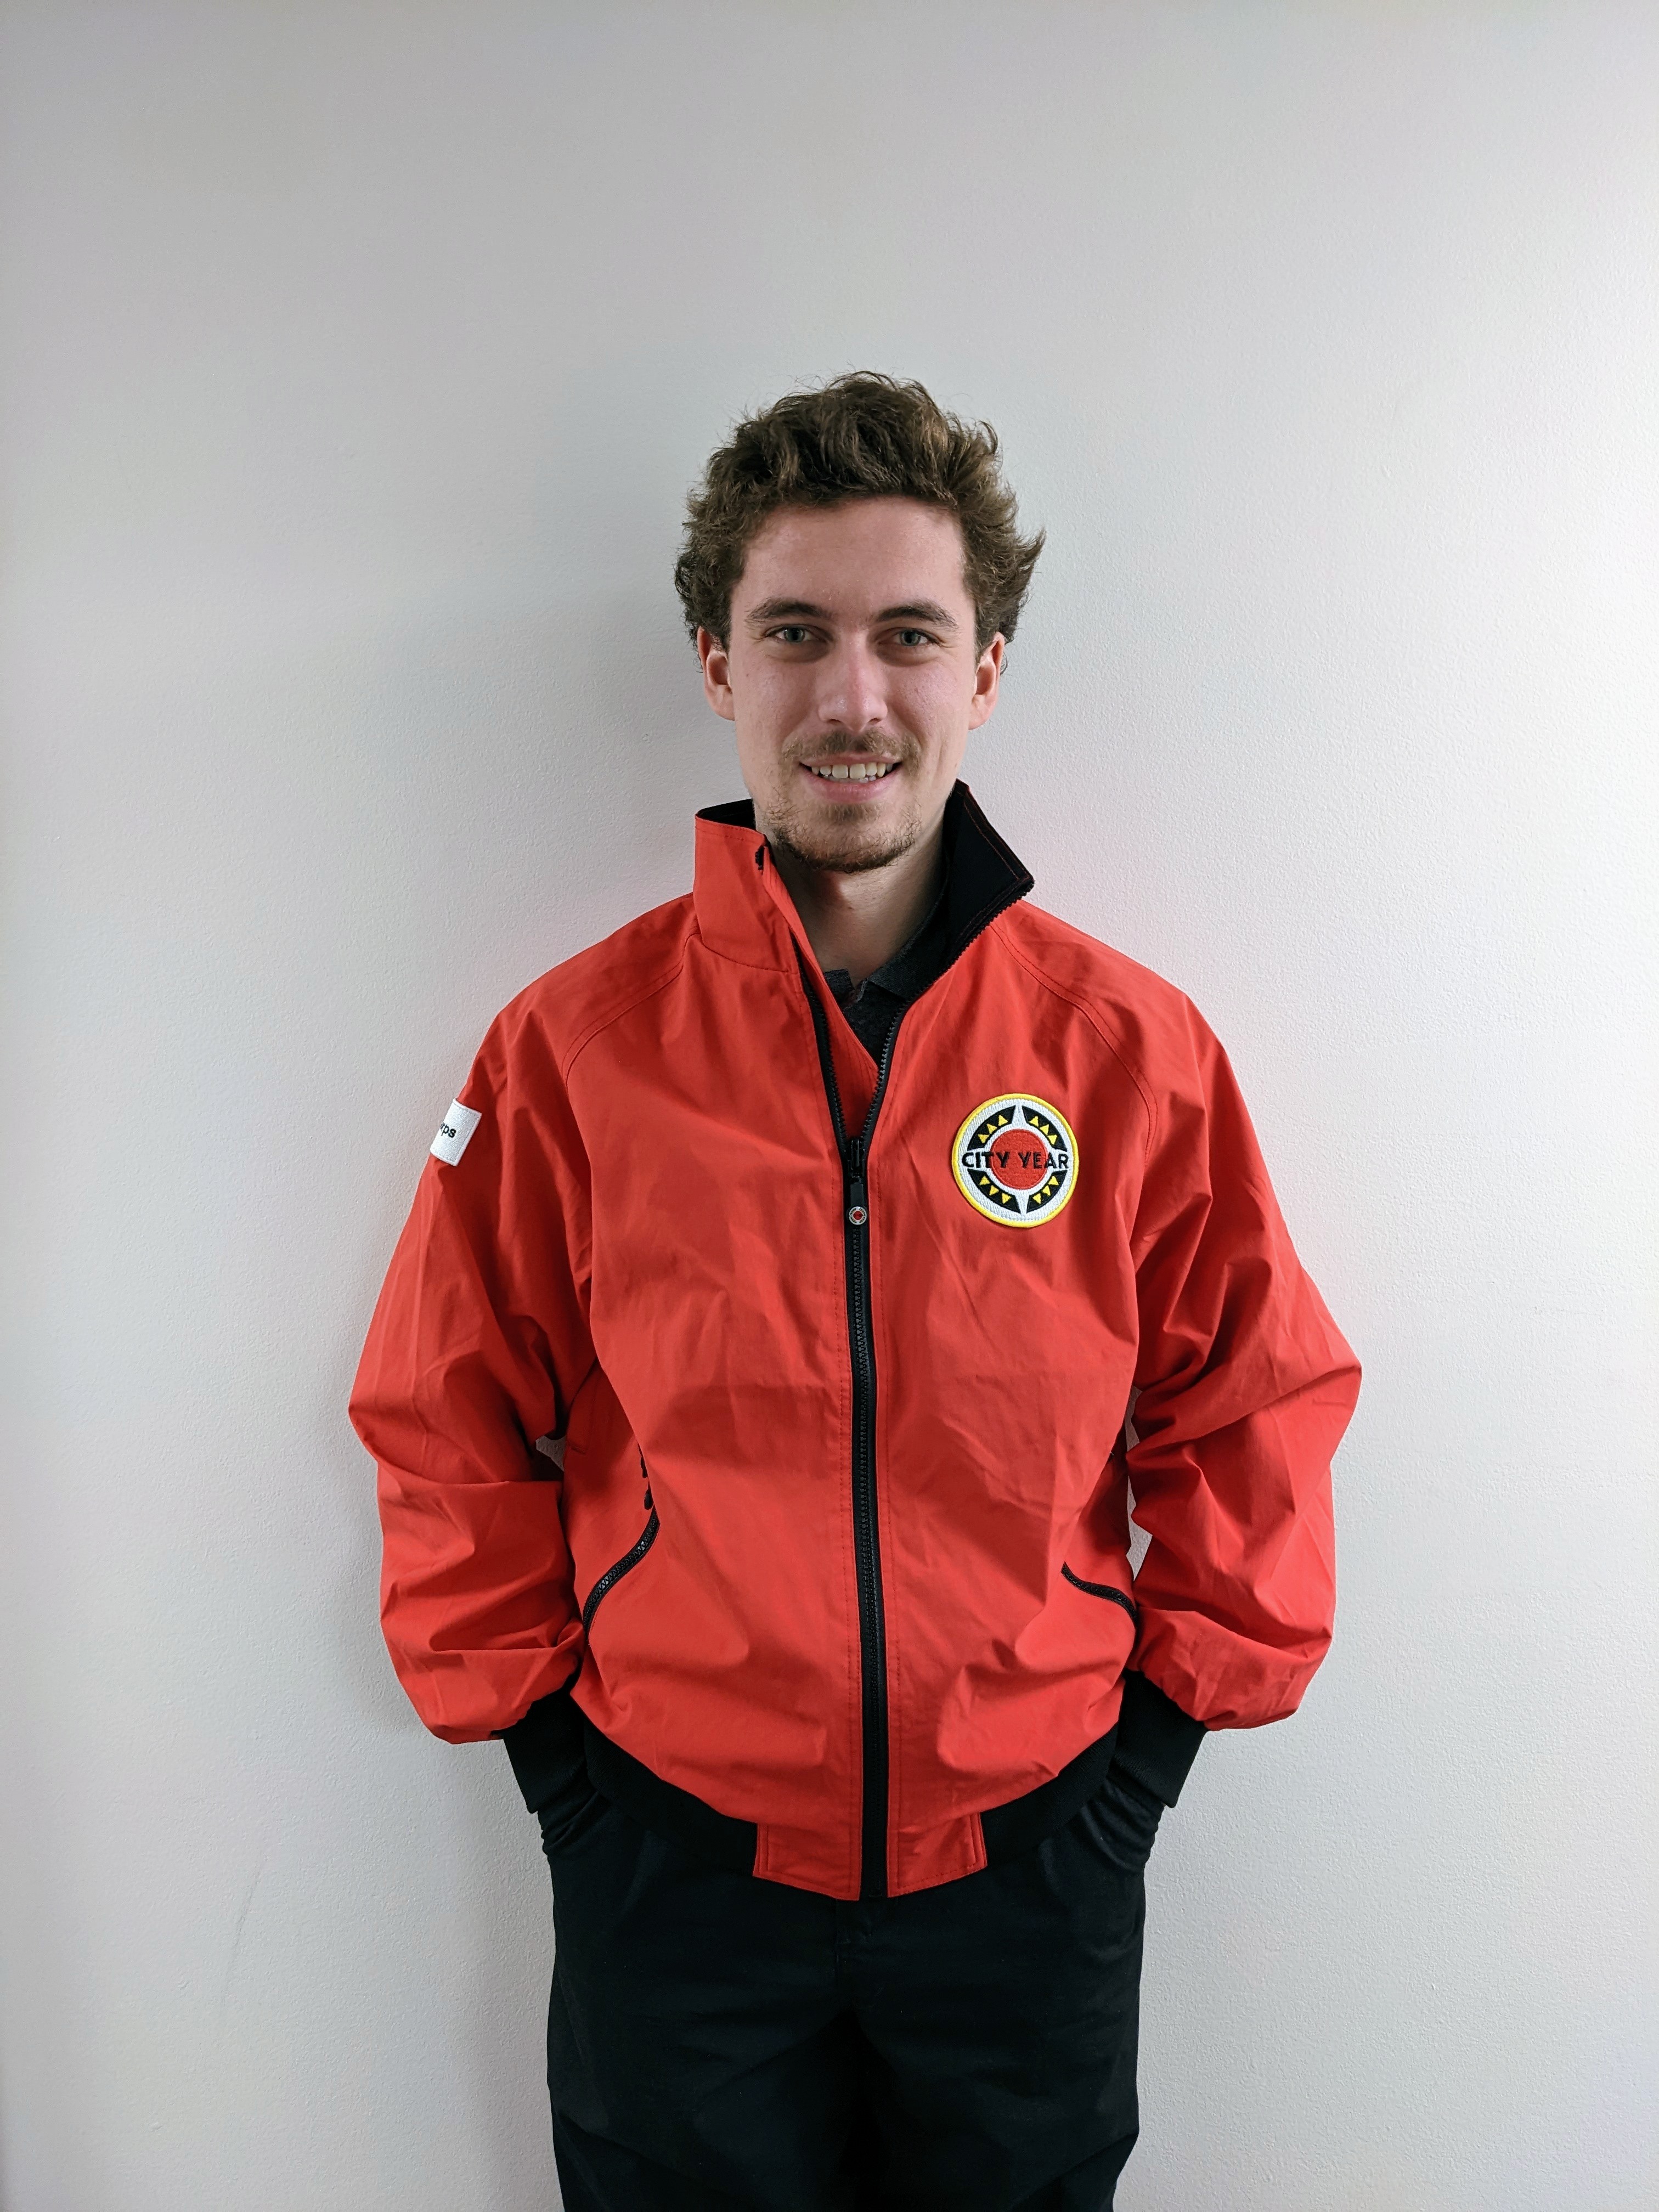 Light-skinned man with brown hair wearing red City Year jacket